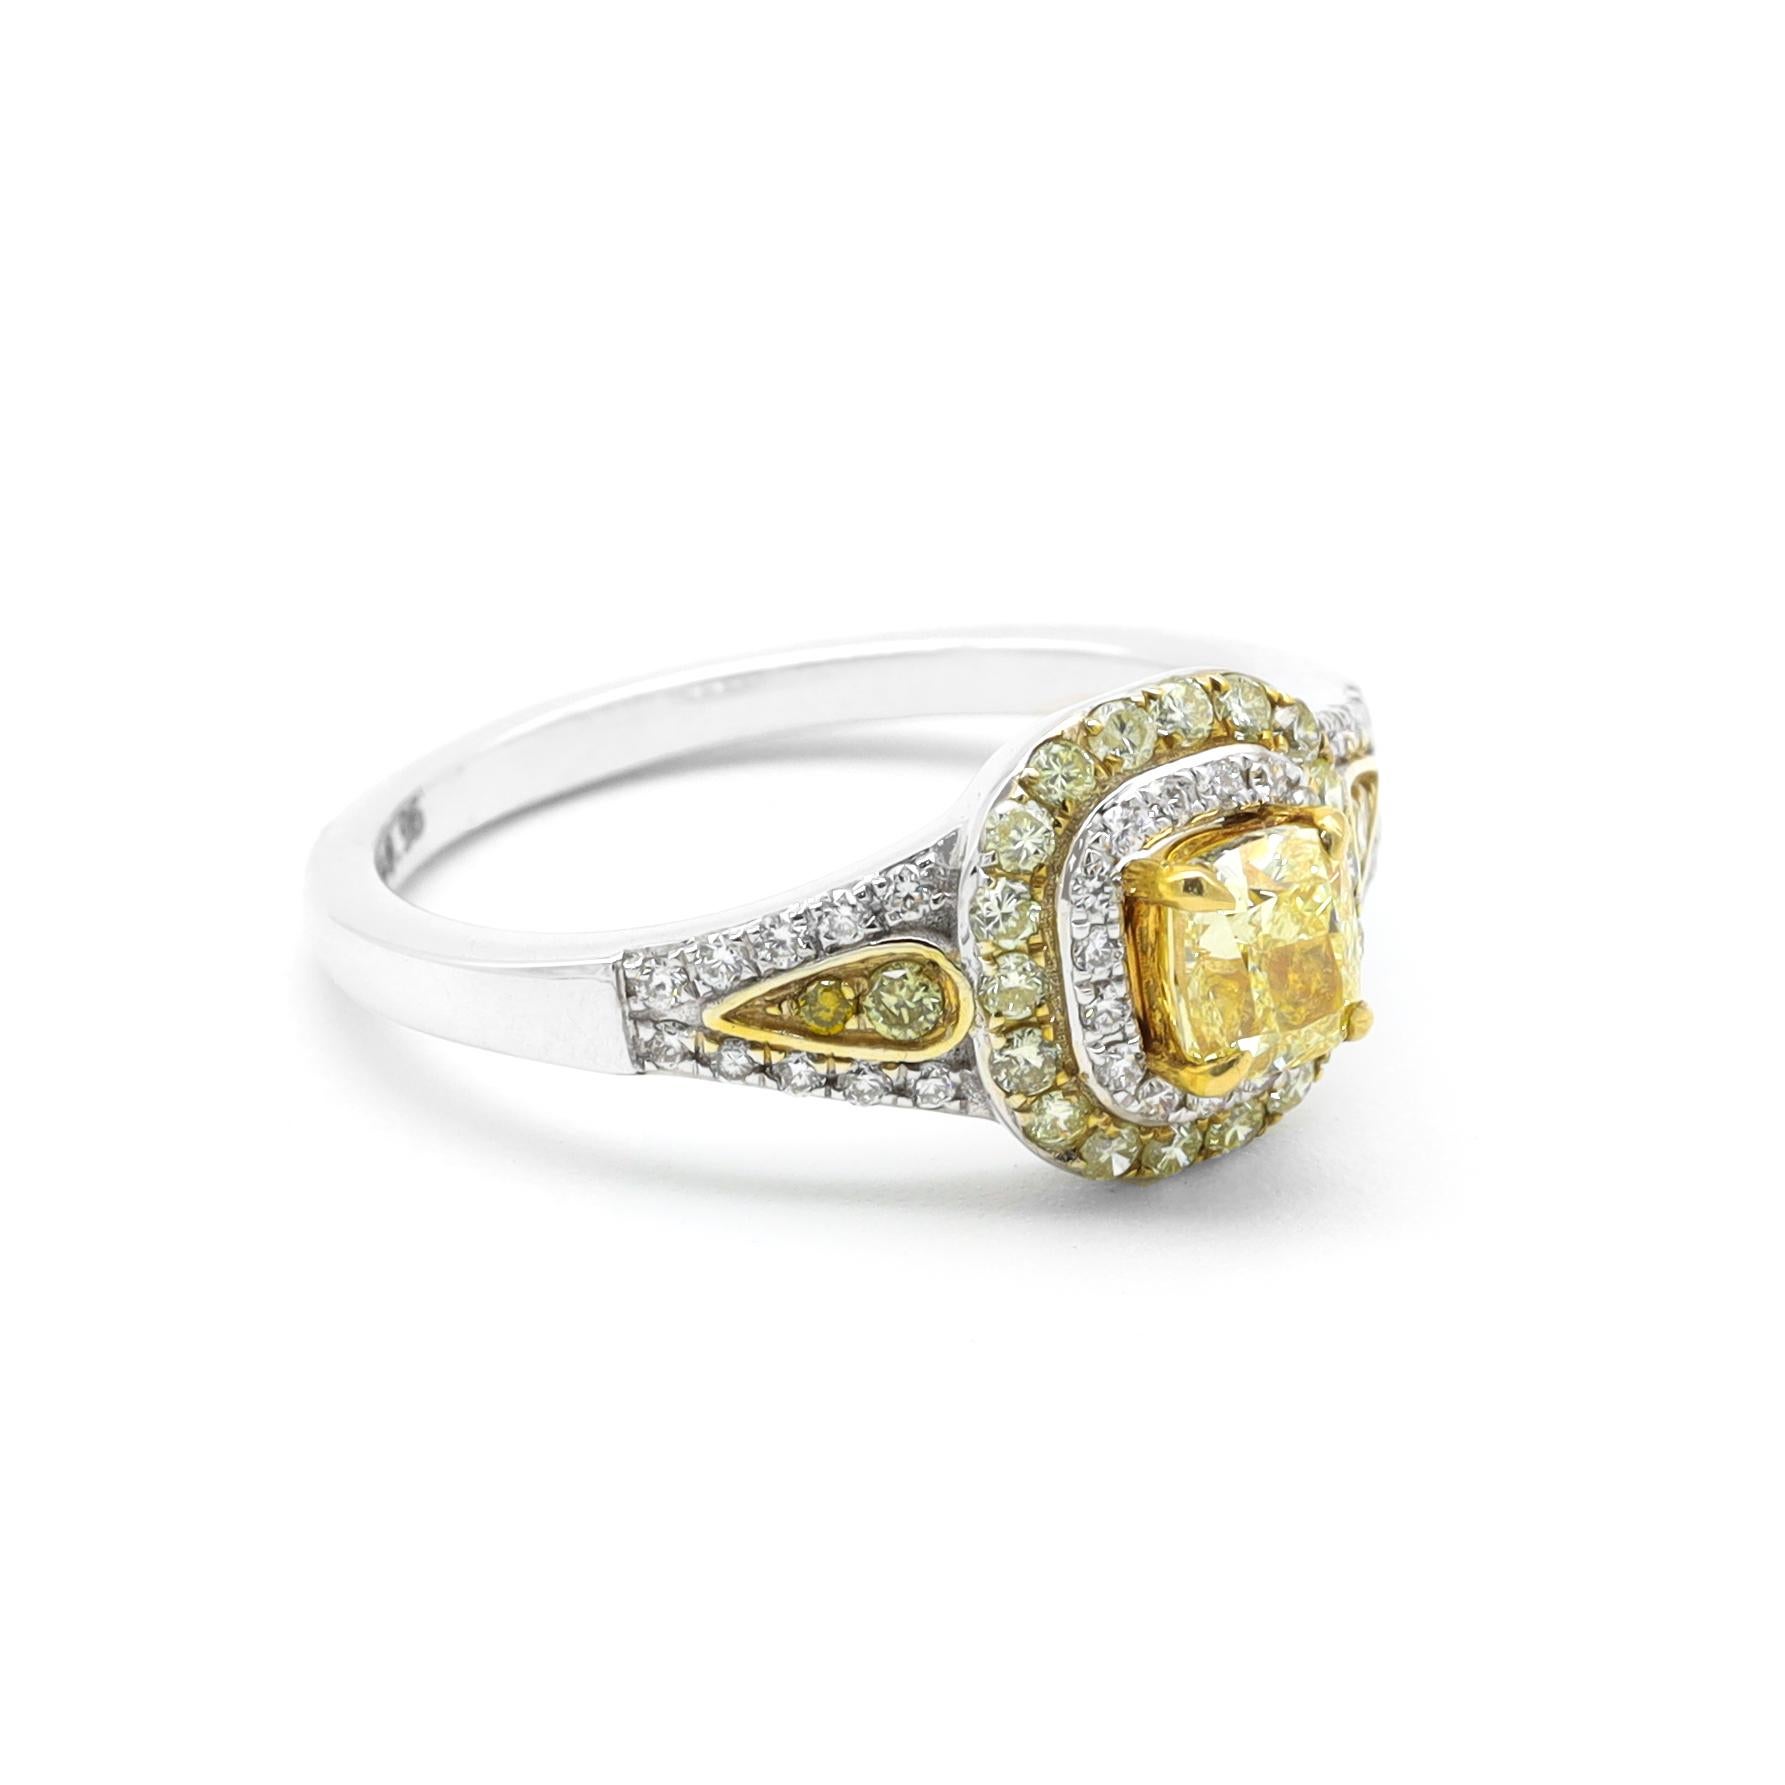 18 Karat Gold Fancy Yellow Diamond and White Diamond Double Cluster Ring

This impressive intense yellow diamond solitaire double cluster and the two-tone ring is exquisite. The cushion-cut yellow diamond center solitaire of 0.61 carat in yellow